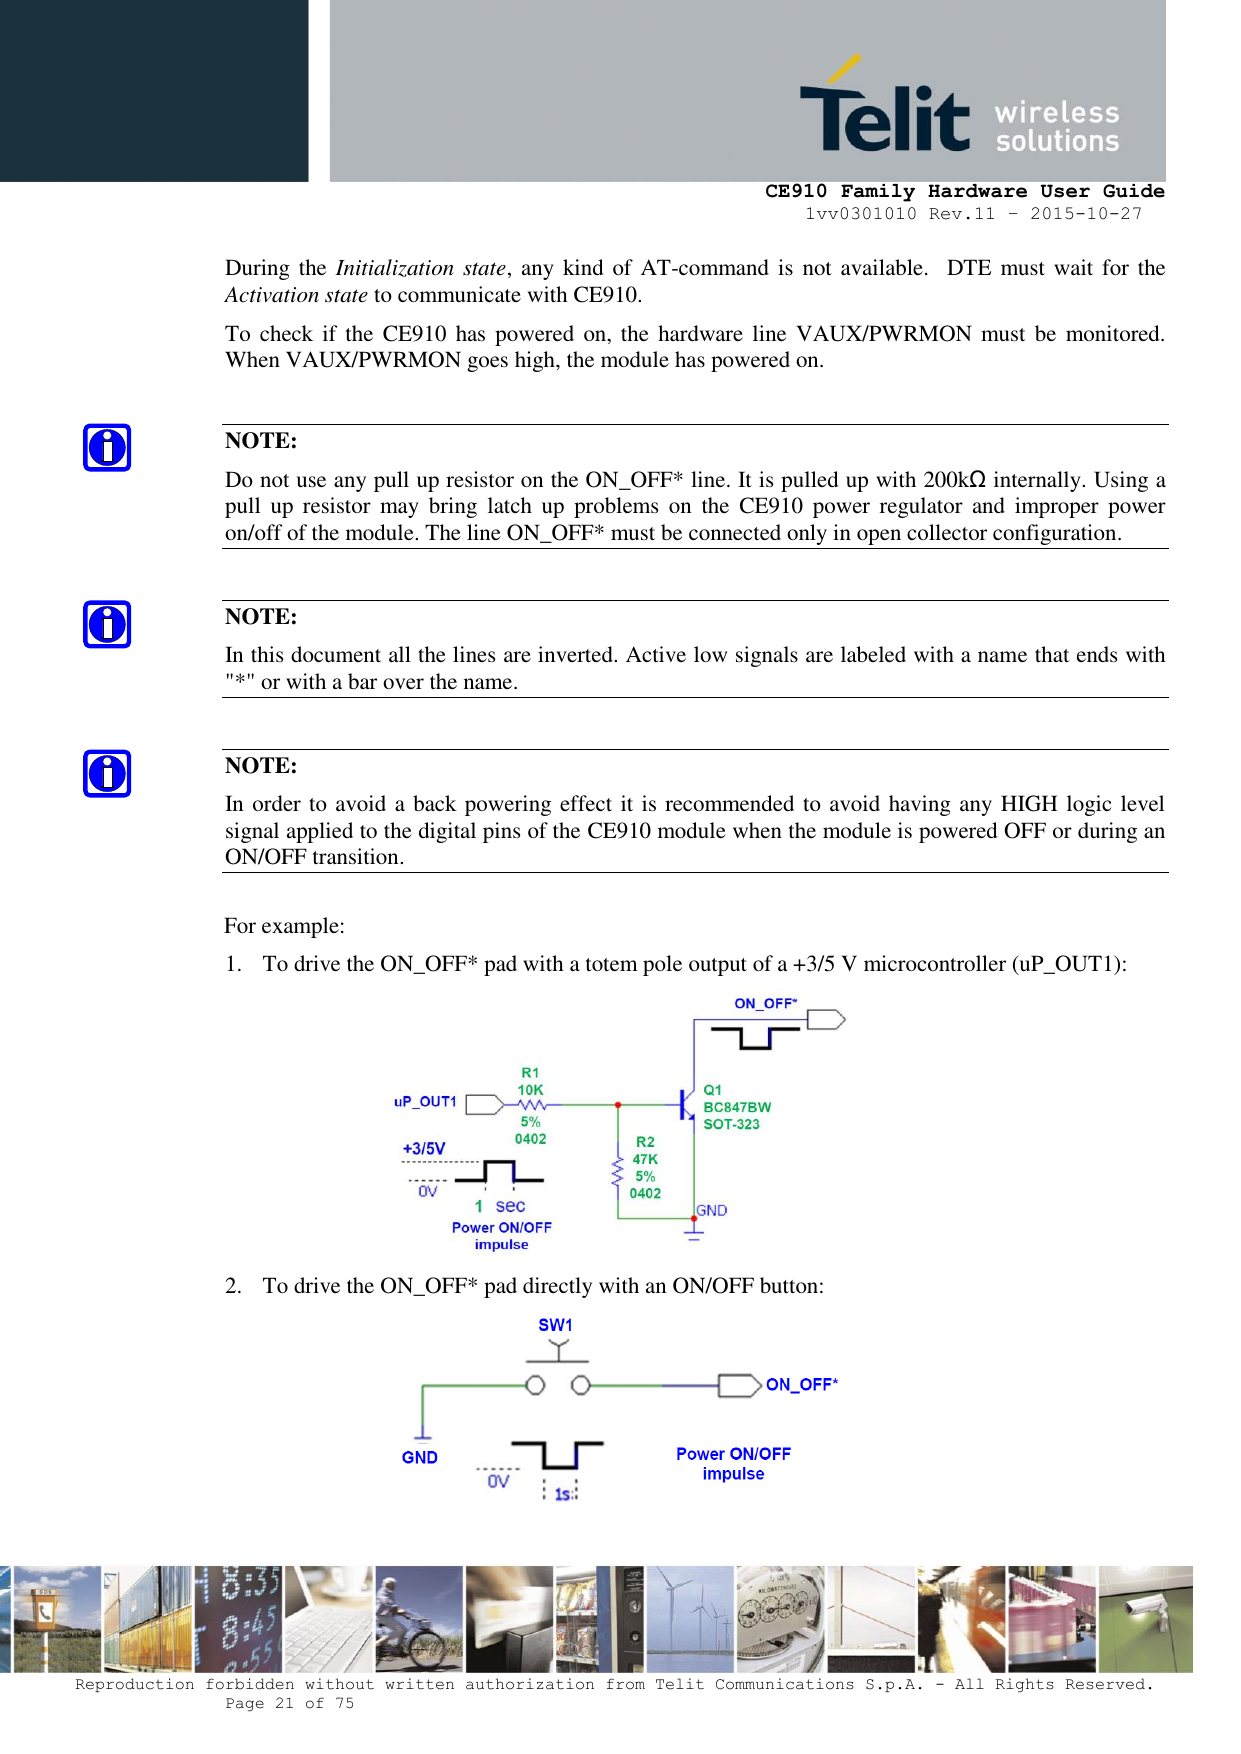     CE910 Family Hardware User Guide 1vv0301010 Rev.11 – 2015-10-27 Reproduction forbidden without written authorization from Telit Communications S.p.A. - All Rights Reserved.    Page 21 of 75                                                     During the Initialization state, any  kind  of AT-command is  not available.  DTE must wait for the Activation state to communicate with CE910. To check  if the  CE910  has powered on, the  hardware line  VAUX/PWRMON must  be  monitored. When VAUX/PWRMON goes high, the module has powered on.  NOTE: Do not use any pull up resistor on the ON_OFF* line. It is pulled up with 200kΩ internally. Using a pull  up  resistor  may  bring  latch  up  problems  on  the  CE910  power  regulator  and  improper  power on/off of the module. The line ON_OFF* must be connected only in open collector configuration.  NOTE: In this document all the lines are inverted. Active low signals are labeled with a name that ends with &quot;*&quot; or with a bar over the name.  NOTE: In order to avoid a back powering effect it is recommended to avoid having any HIGH logic level signal applied to the digital pins of the CE910 module when the module is powered OFF or during an ON/OFF transition.  For example: 1. To drive the ON_OFF* pad with a totem pole output of a +3/5 V microcontroller (uP_OUT1):  2. To drive the ON_OFF* pad directly with an ON/OFF button:  